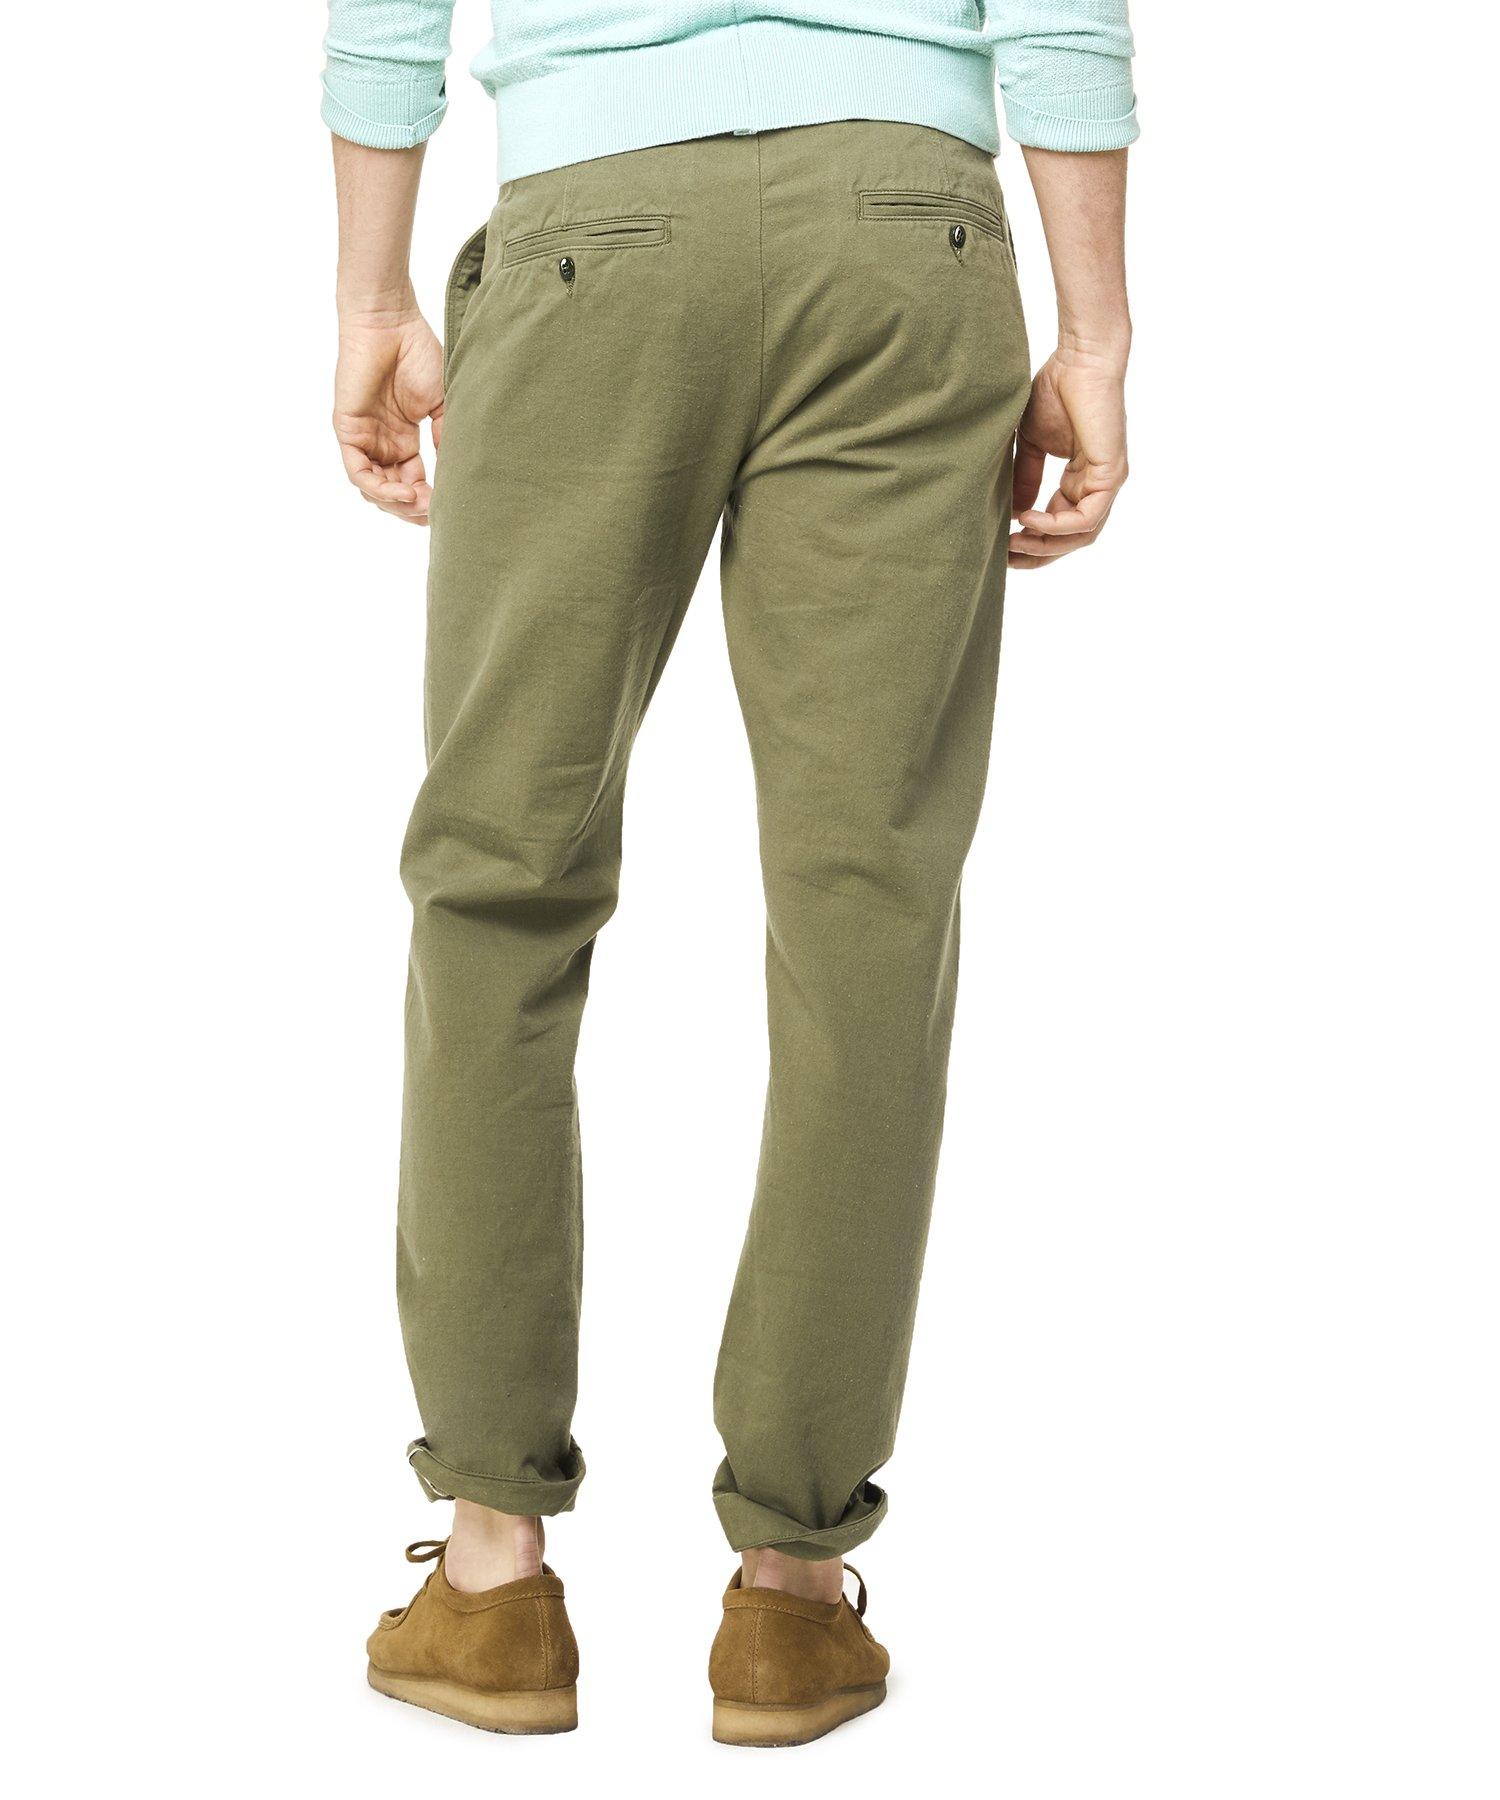 Todd Synder X Champion Japanese Selvedge Chino Officer Pant In Olive in ...